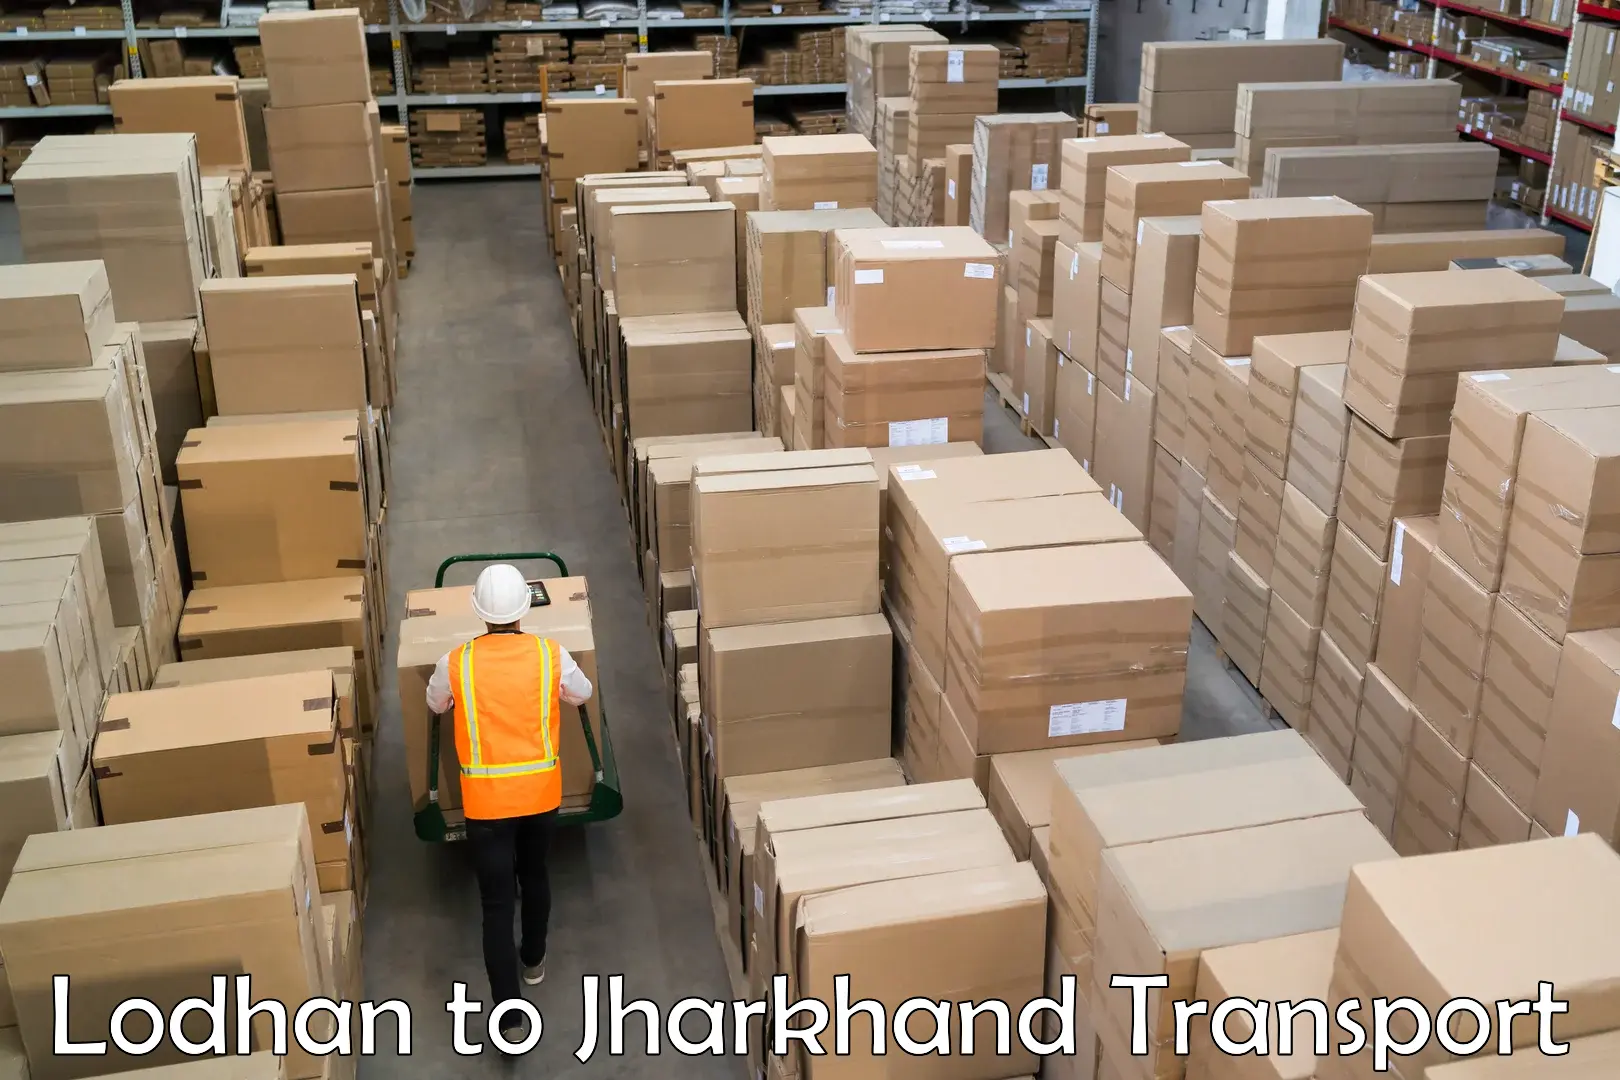 Air freight transport services Lodhan to Jharkhand